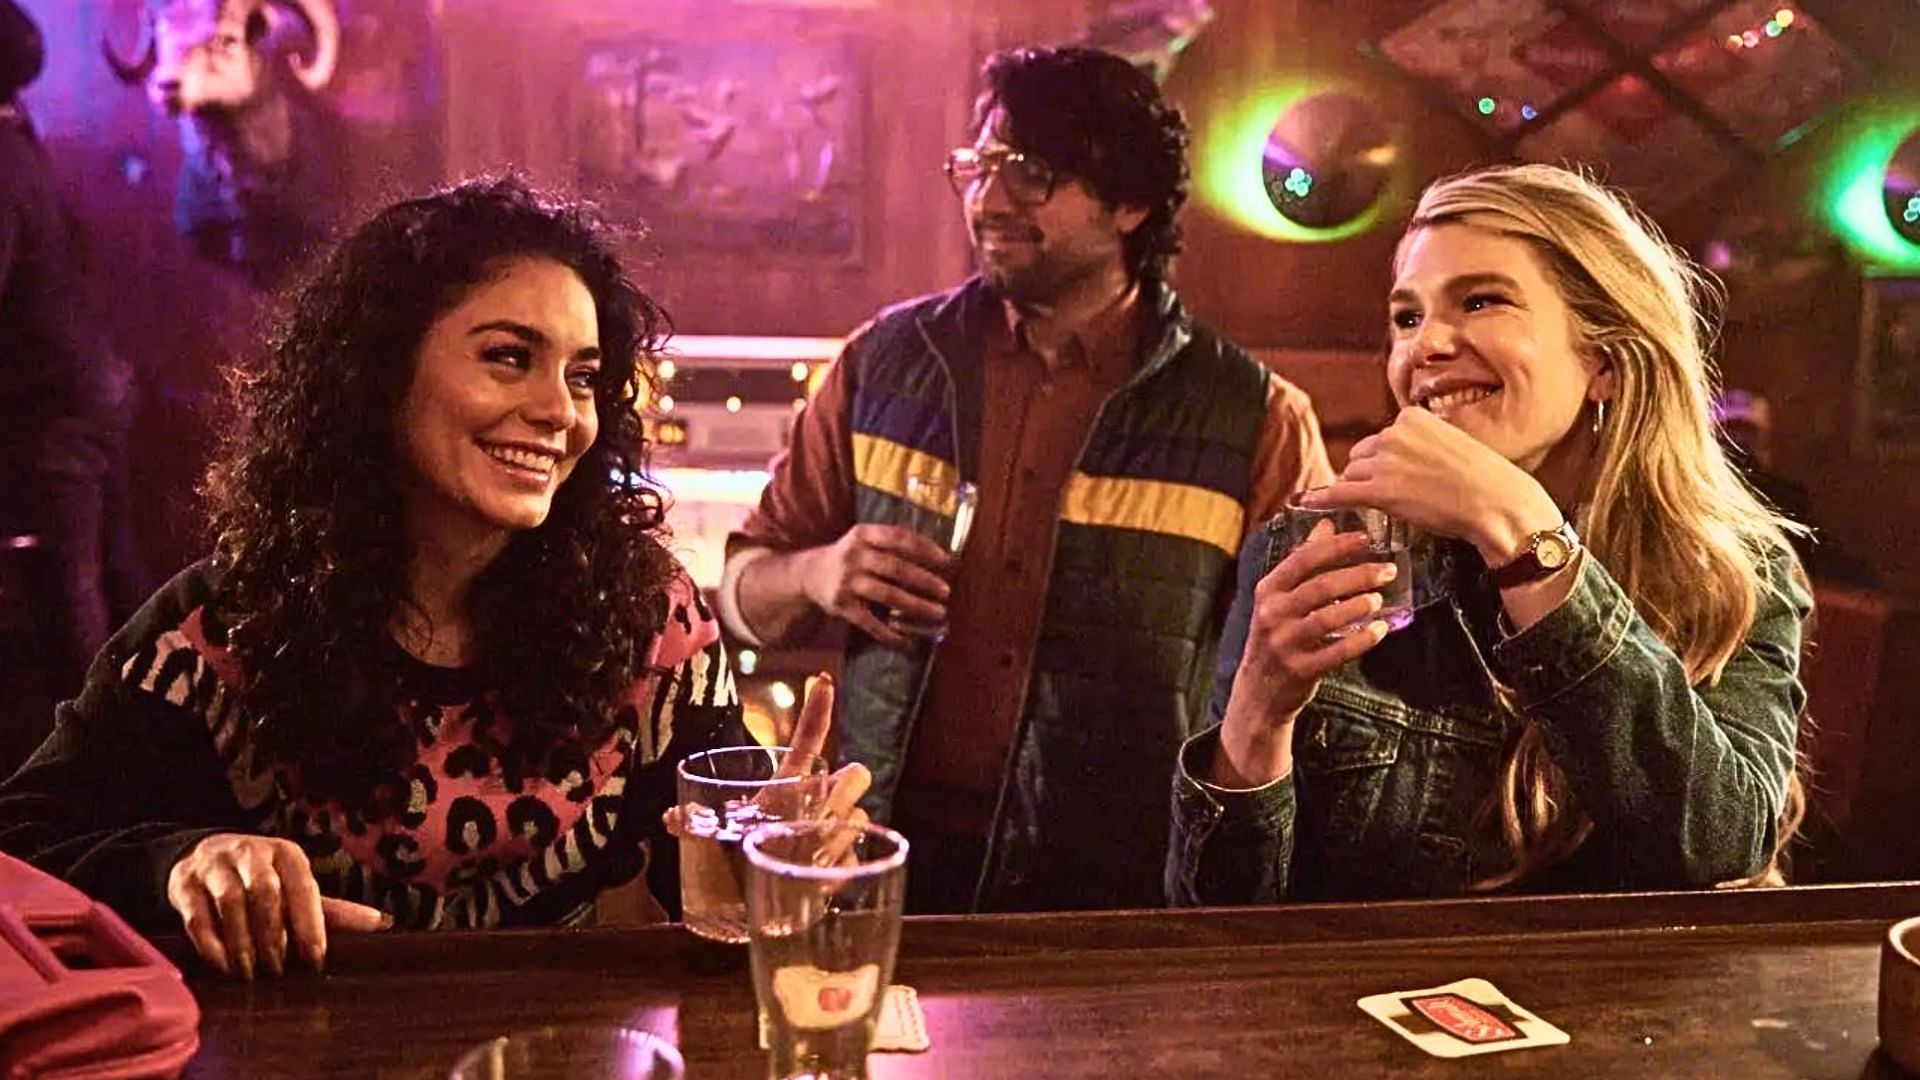 Vanessa Hudgens (left) and Lily Rabe (right) in a still from Downtown Owl (Image via Sony Pictures)